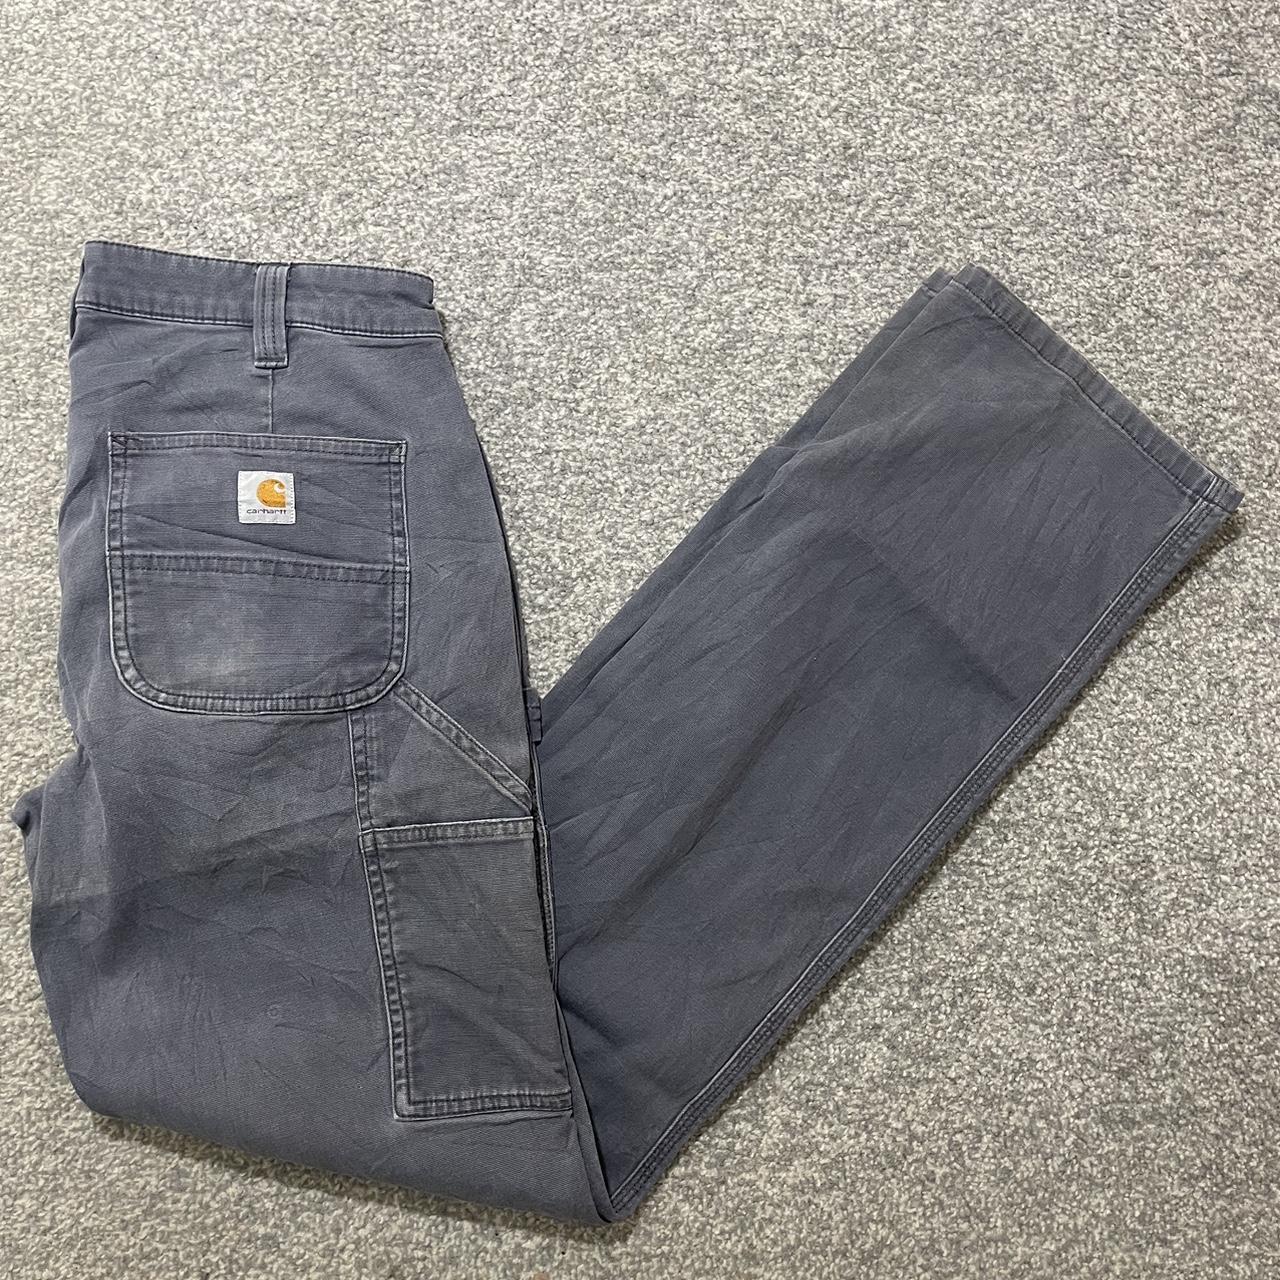 Carhartt dark grey trousers Condition as shown on... - Depop